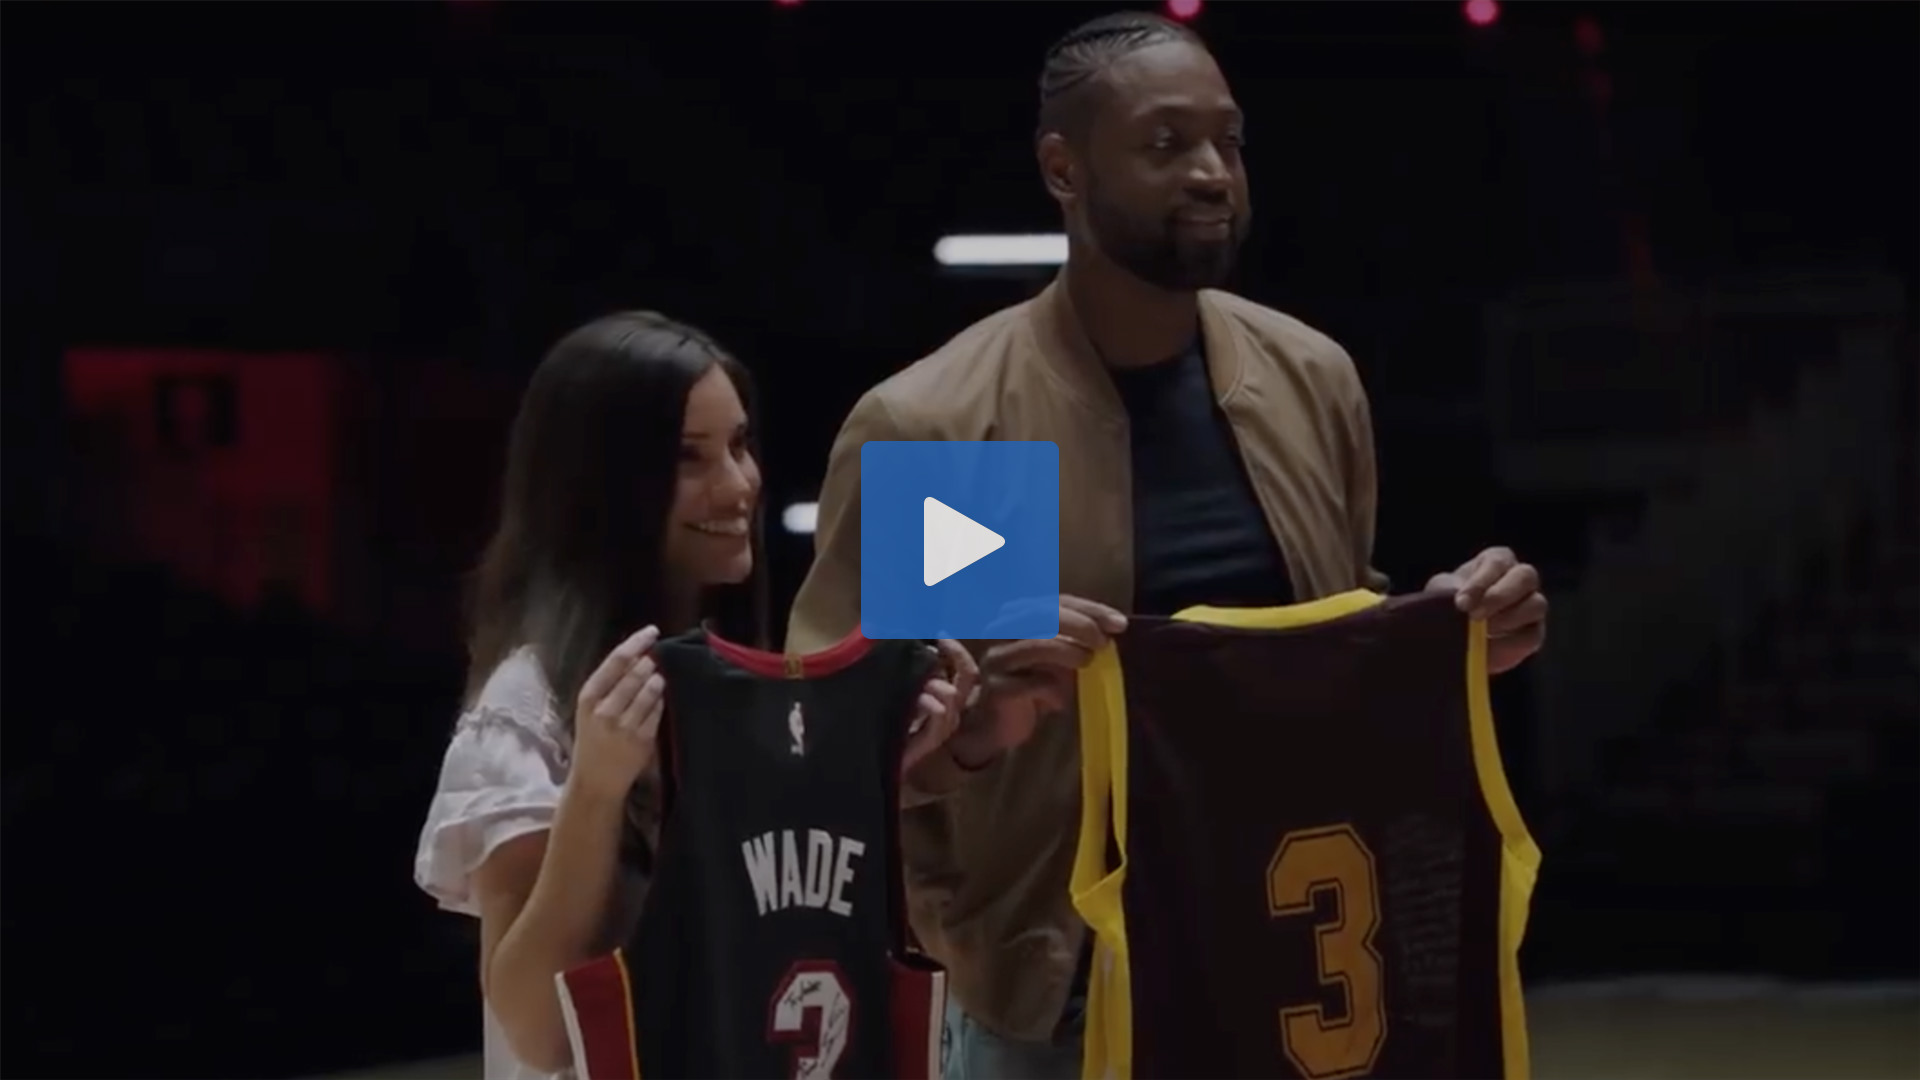 WATCH: Budweiser honours Dwyane Wade's legacy with emotional commercial | NBA.com ...